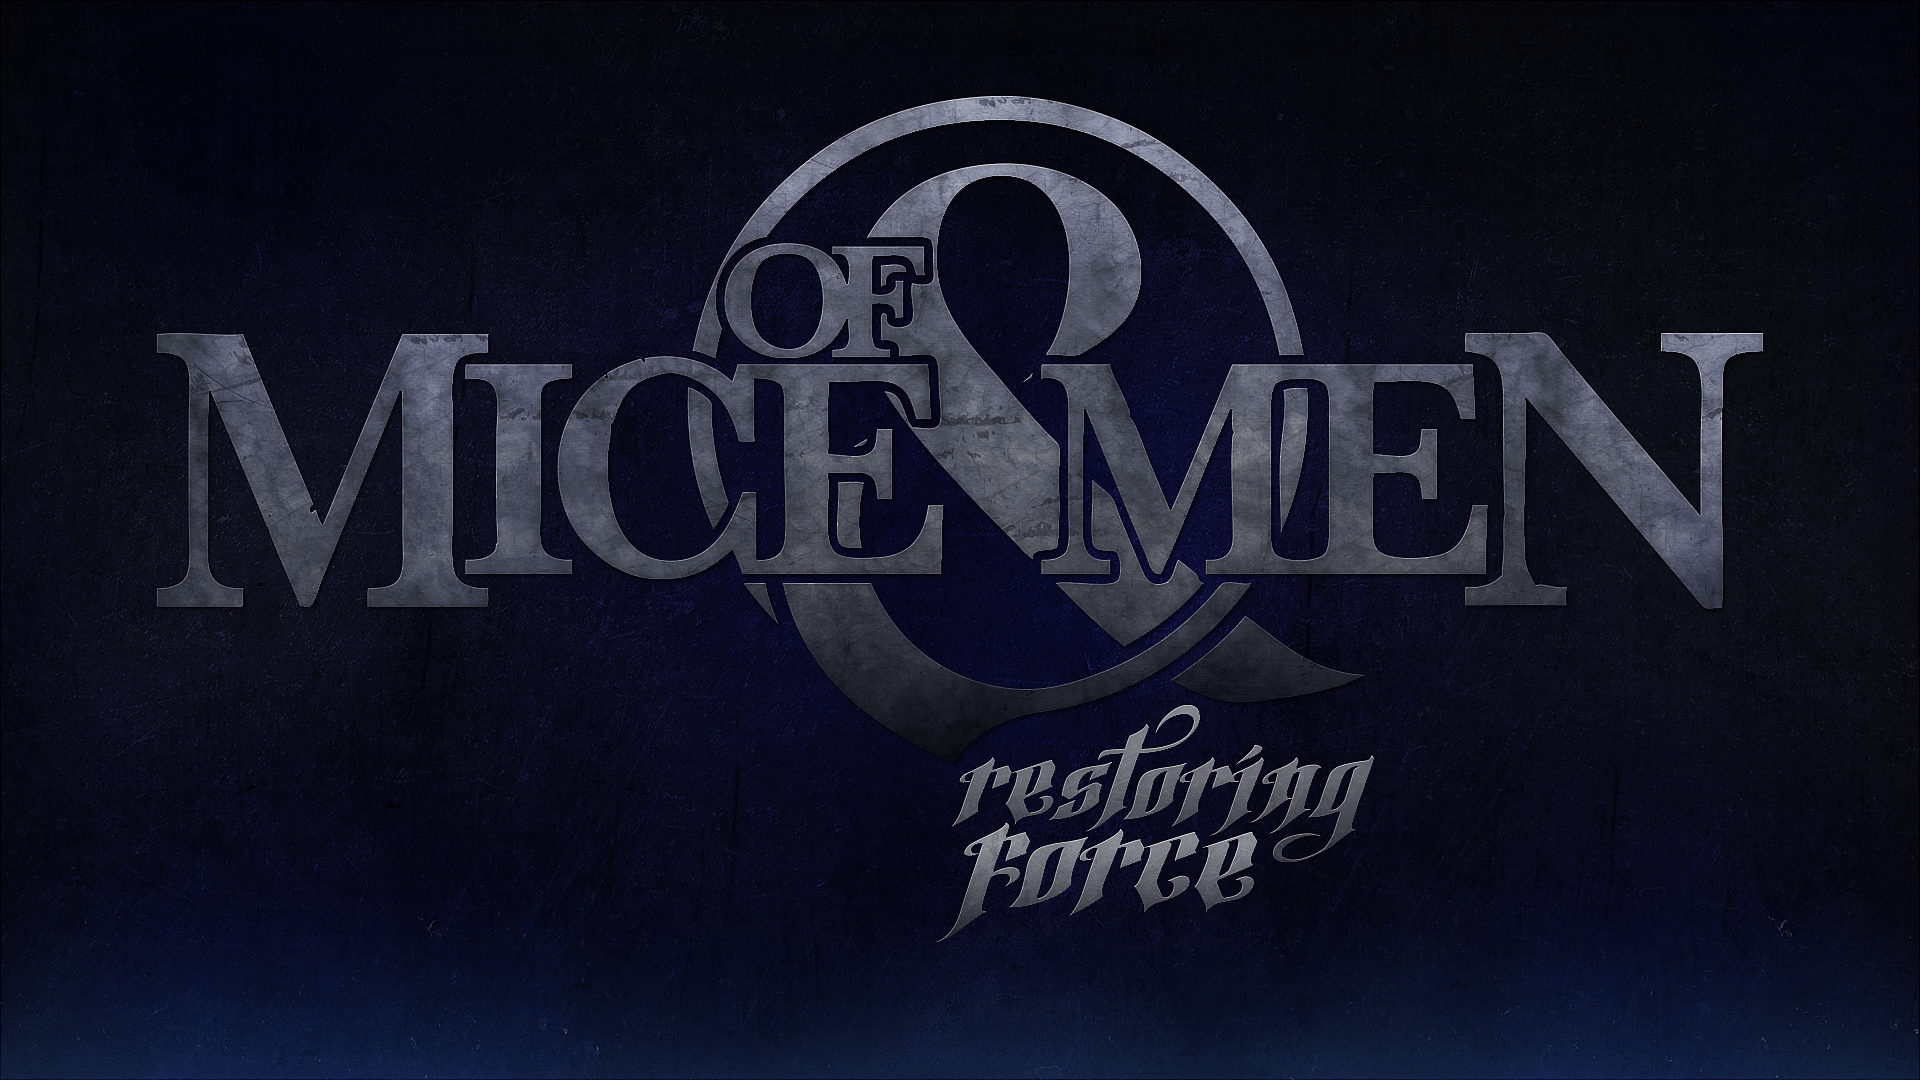 Of Mice and Men Logo - Of Mice And Men Wallpapers - Wallpaper Cave